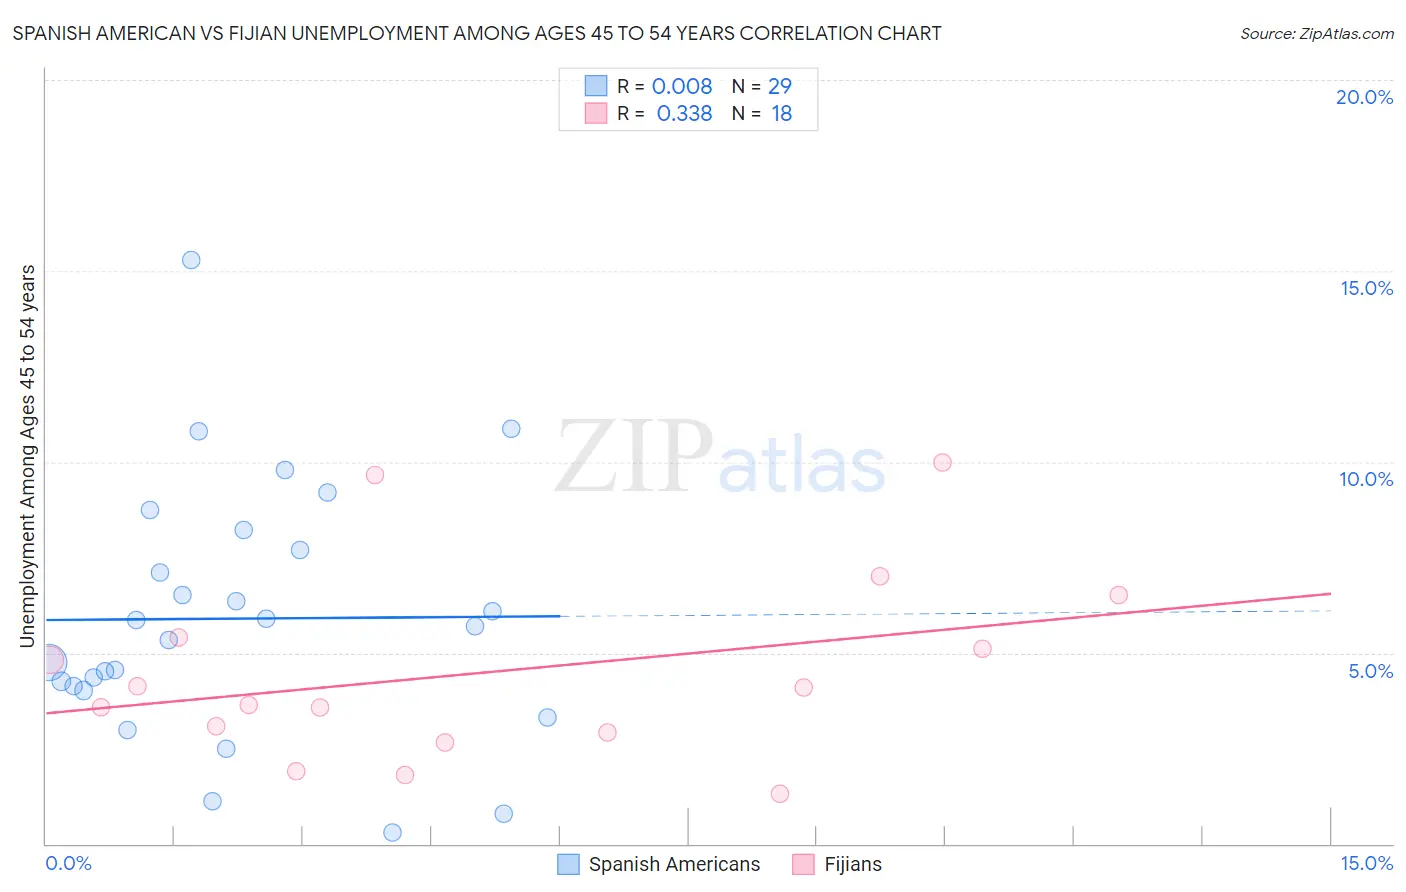 Spanish American vs Fijian Unemployment Among Ages 45 to 54 years